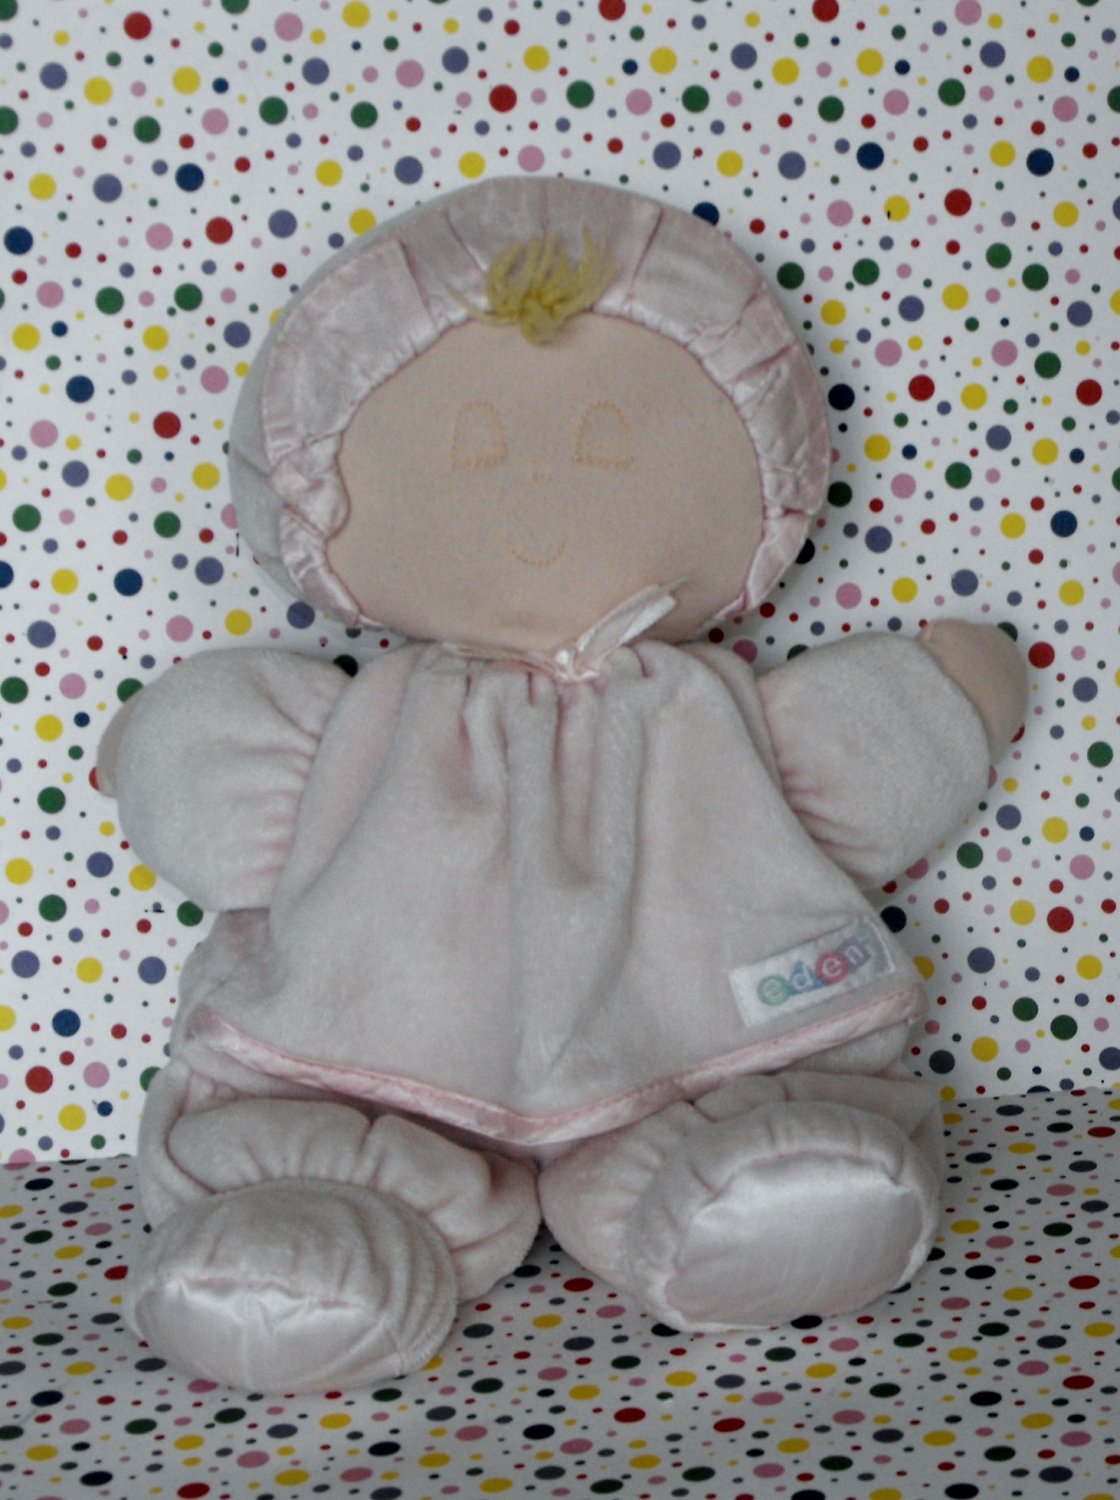 4*SOLD~Eden Toys Classic So Soft Pink Baby's First Baby Doll Sleeping